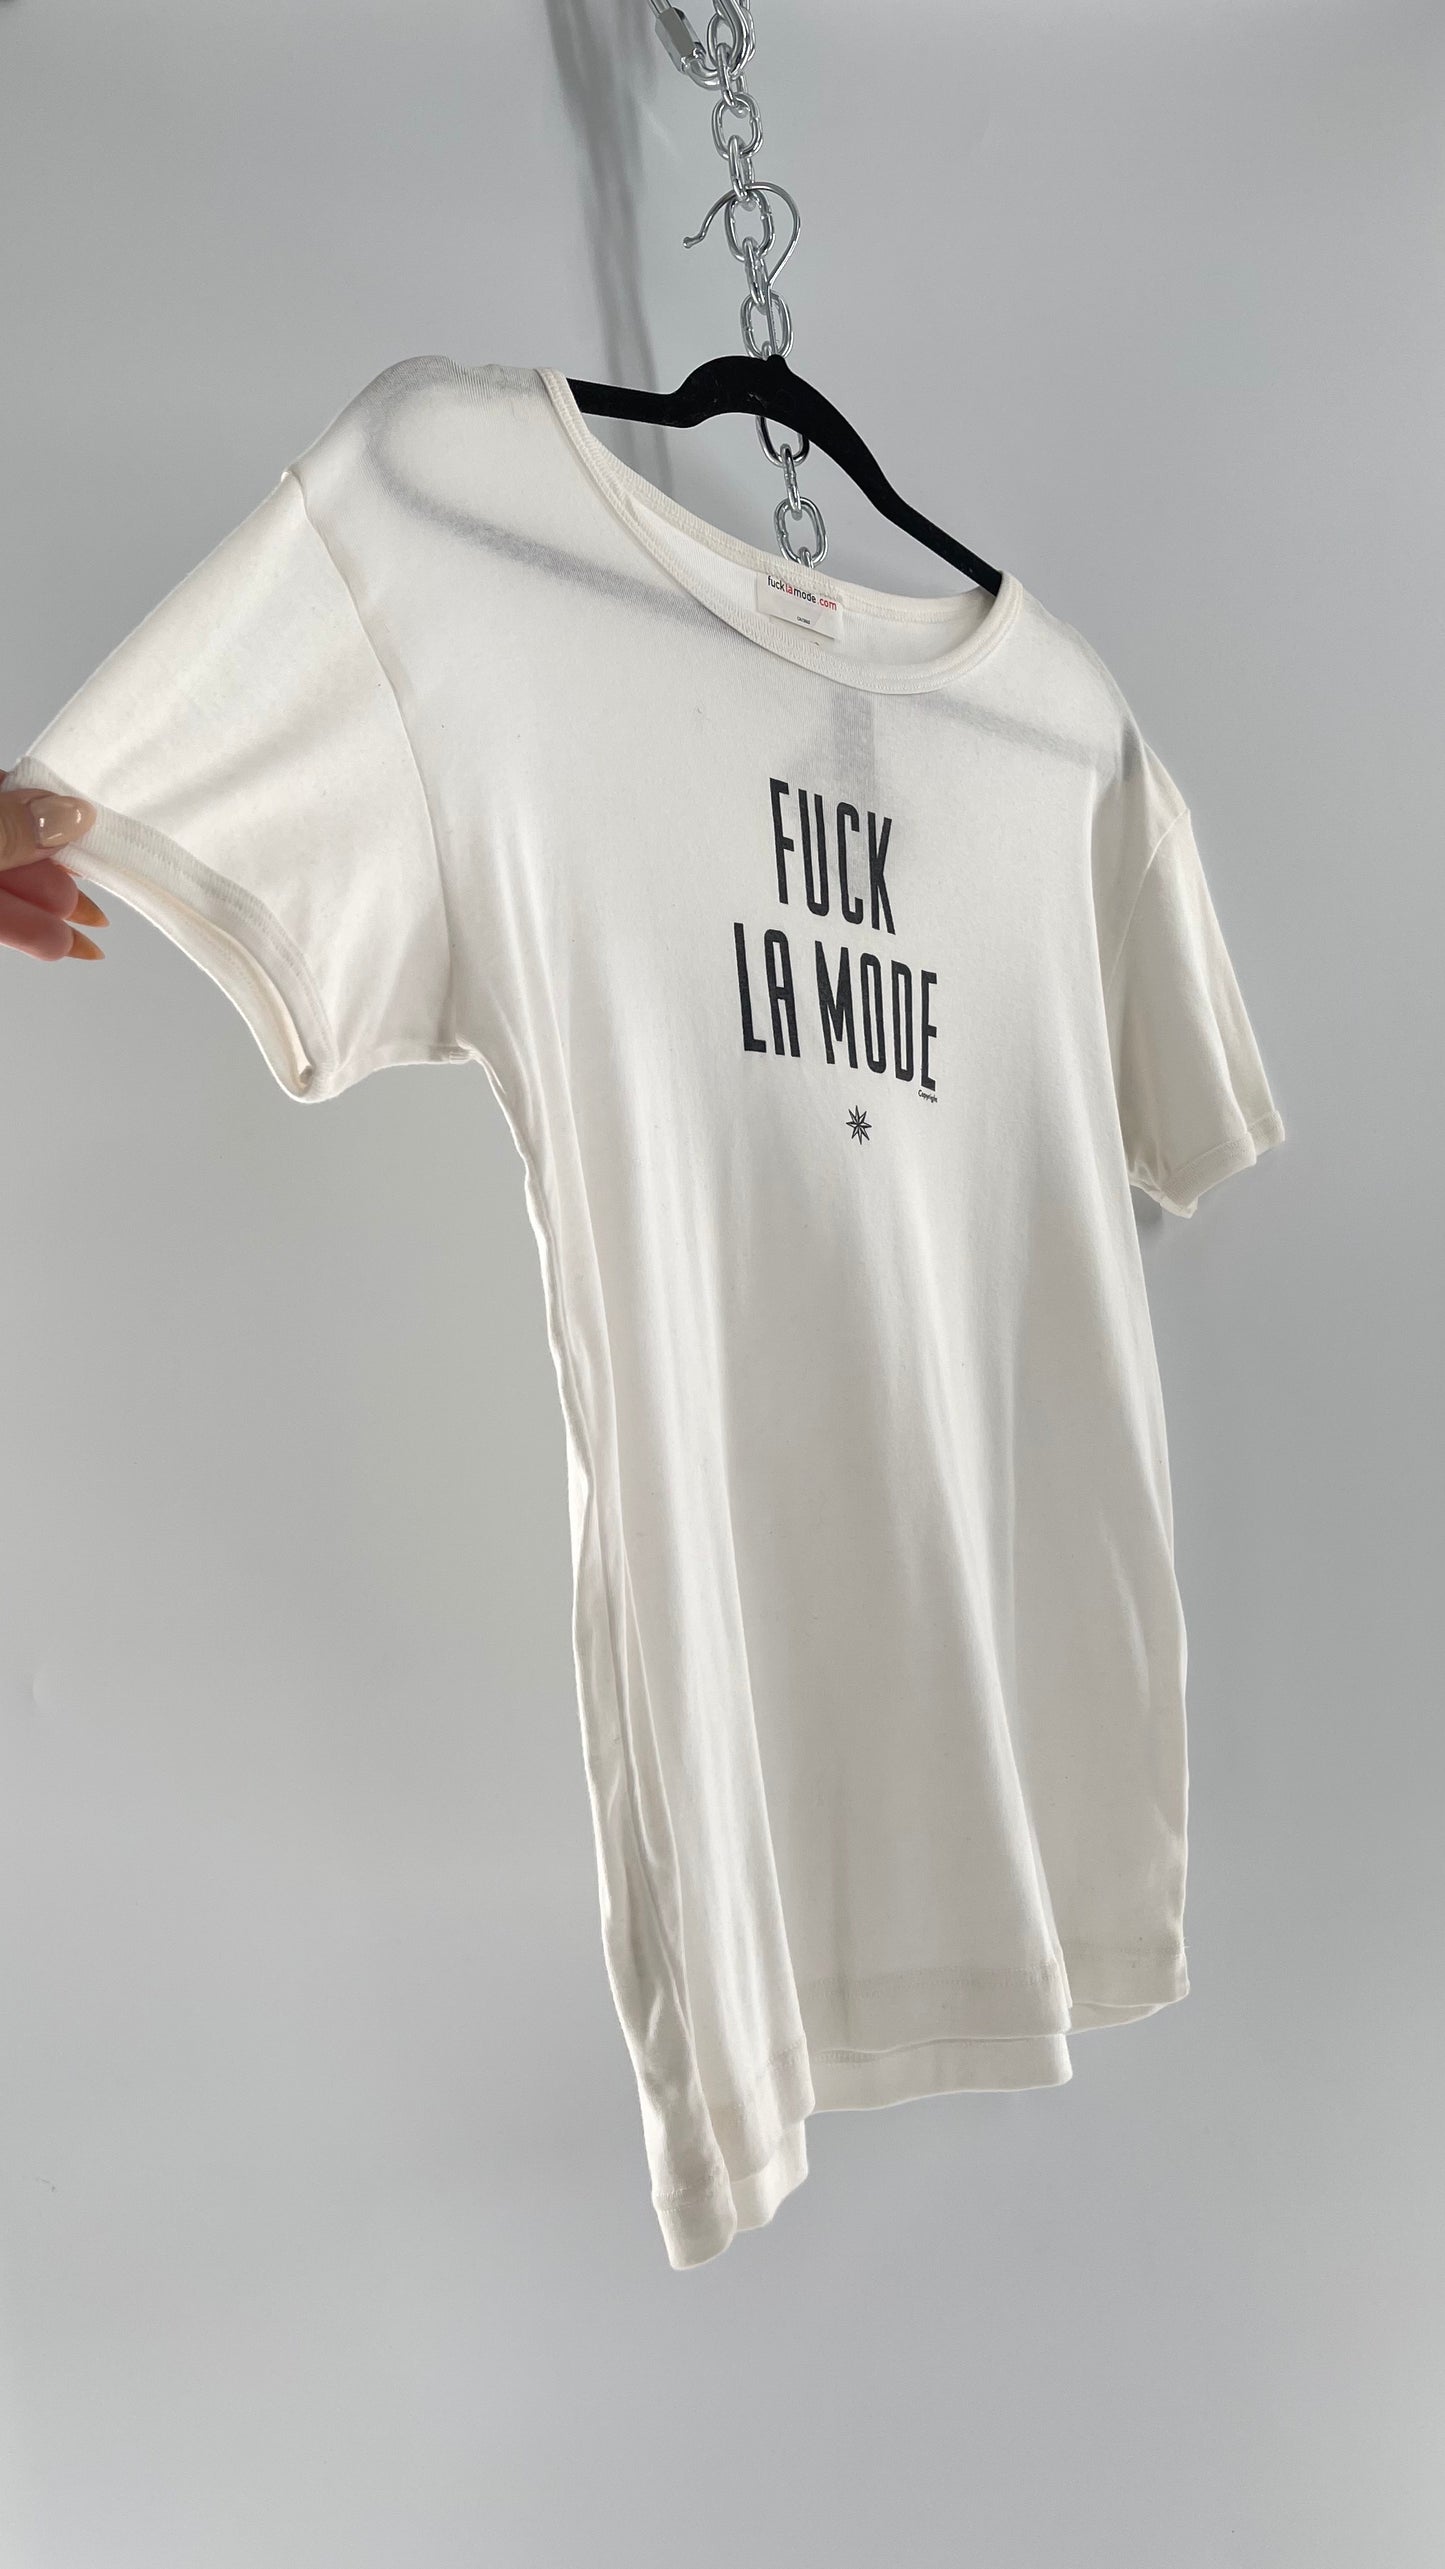 Deadstock Vintage Fuck La Mode T Shirt with Tags Attached (Large)